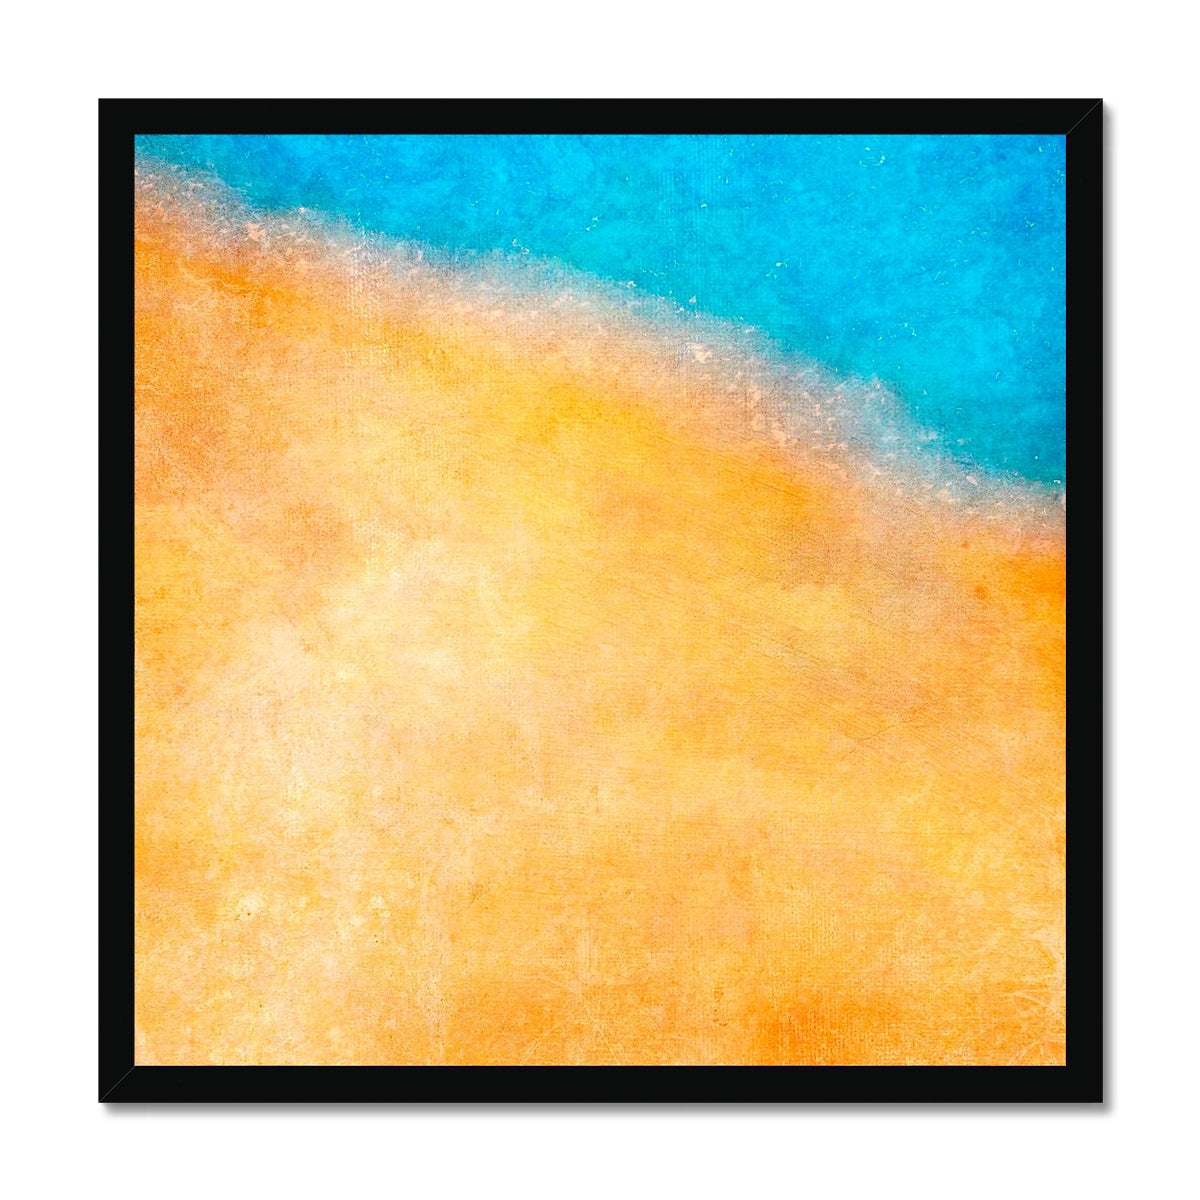 The Shoreline Abstract Painting | Framed Prints From Scotland-Framed Prints-Abstract & Impressionistic Art Gallery-20"x20"-Black Frame-Paintings, Prints, Homeware, Art Gifts From Scotland By Scottish Artist Kevin Hunter